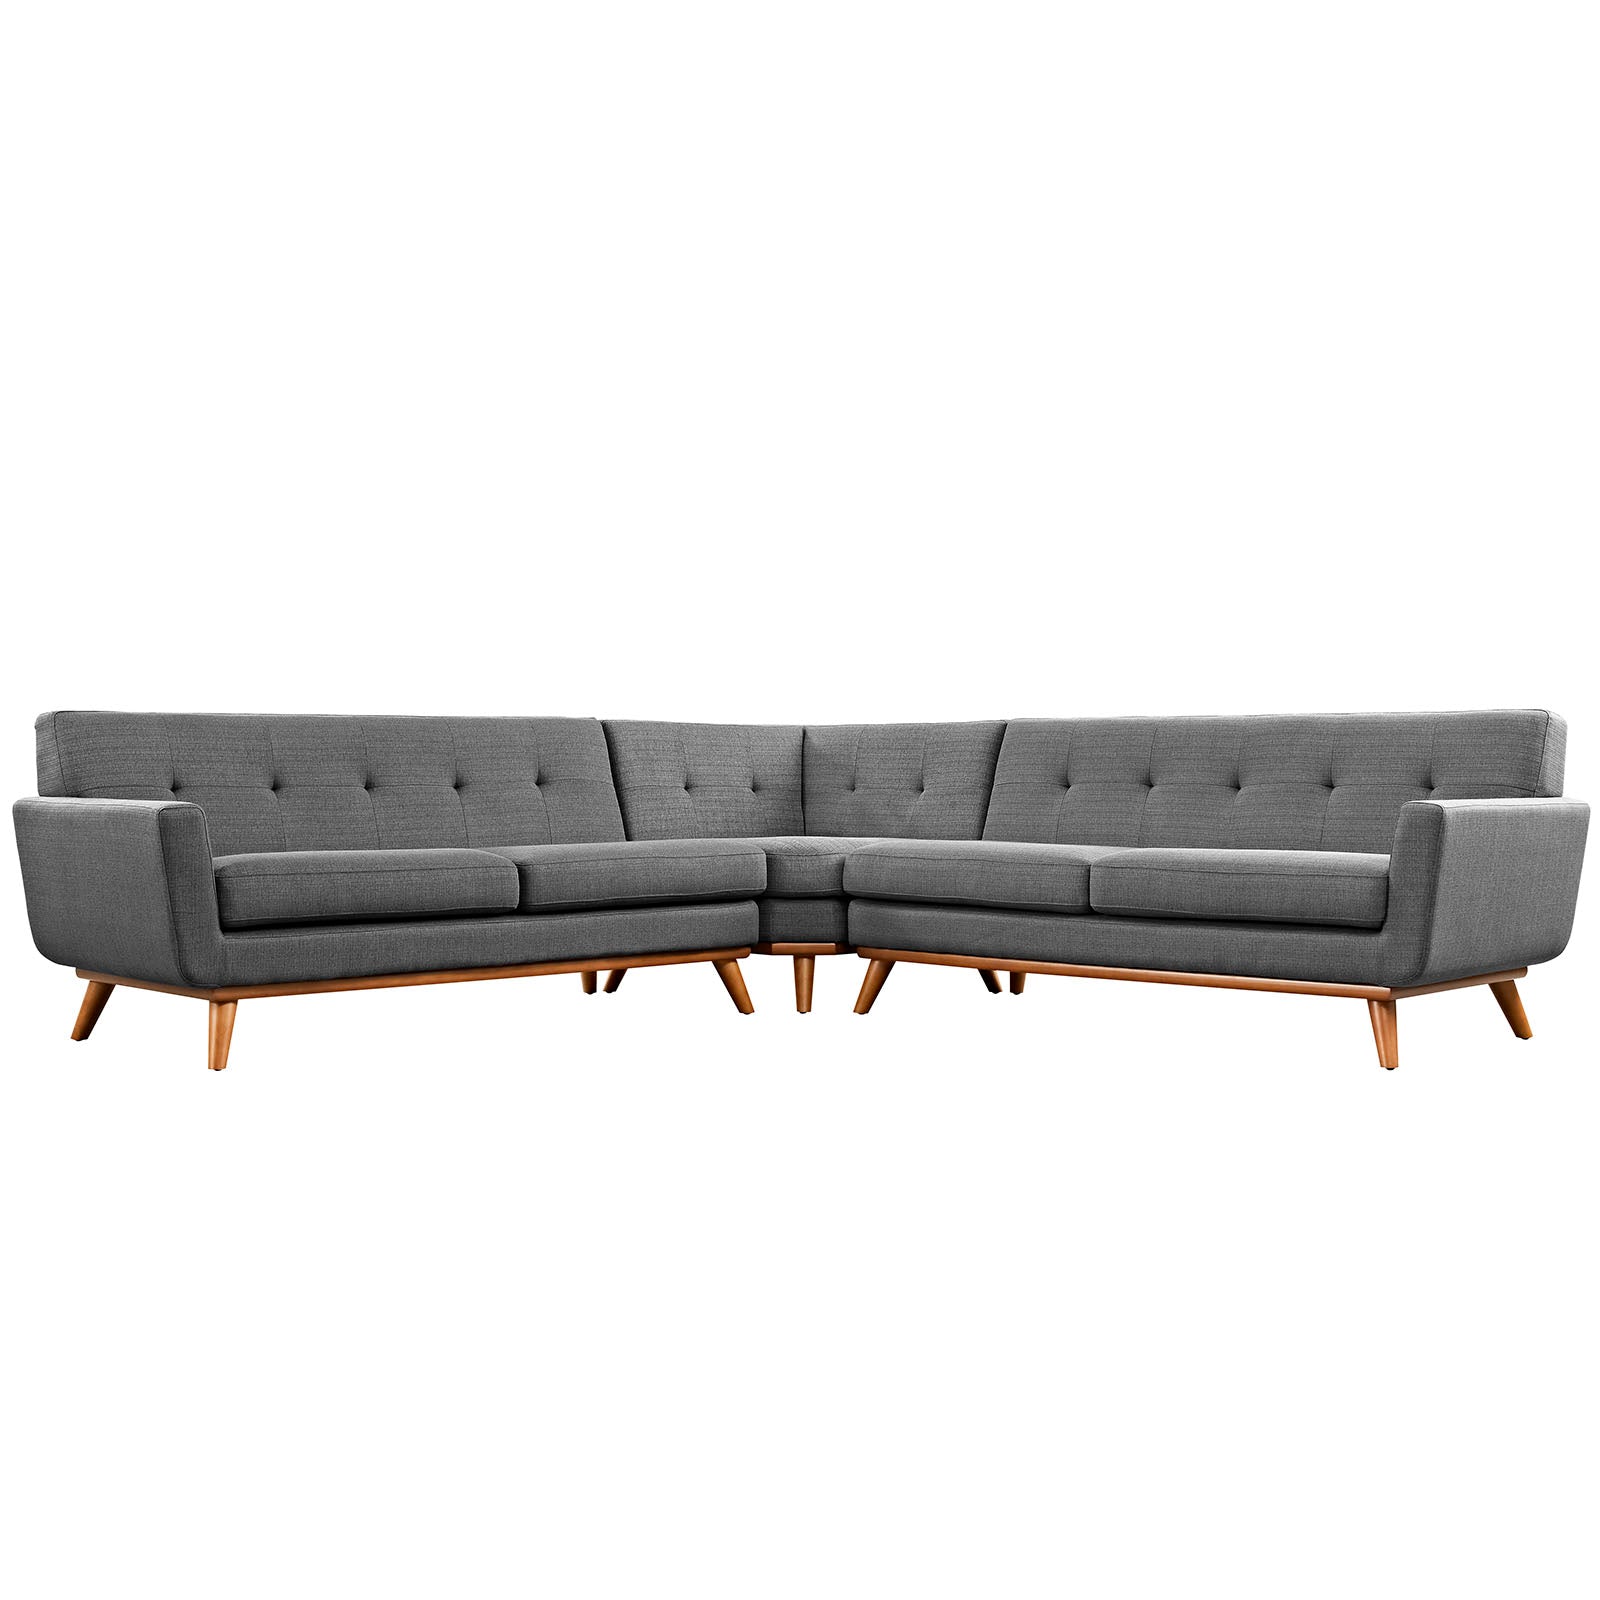 Modway Sectional Sofas - Engage L-Shaped Sectional Sofa Gray